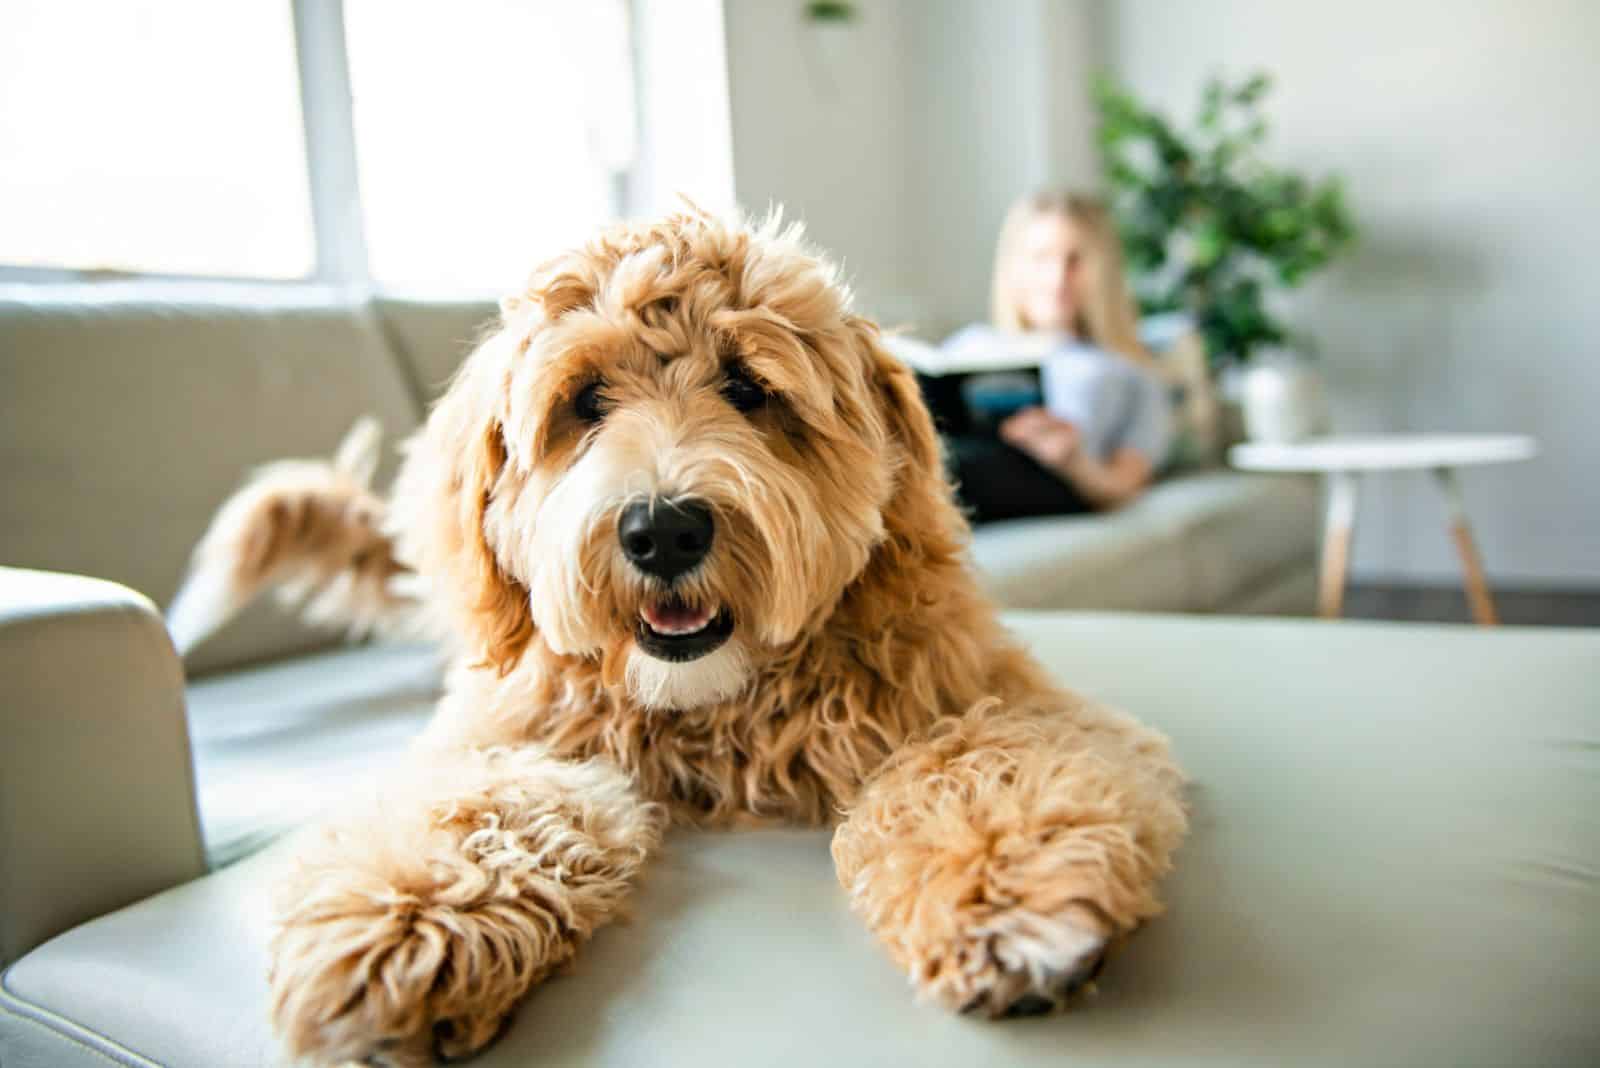 A goldendoodle is lying on the couch with its tongue out